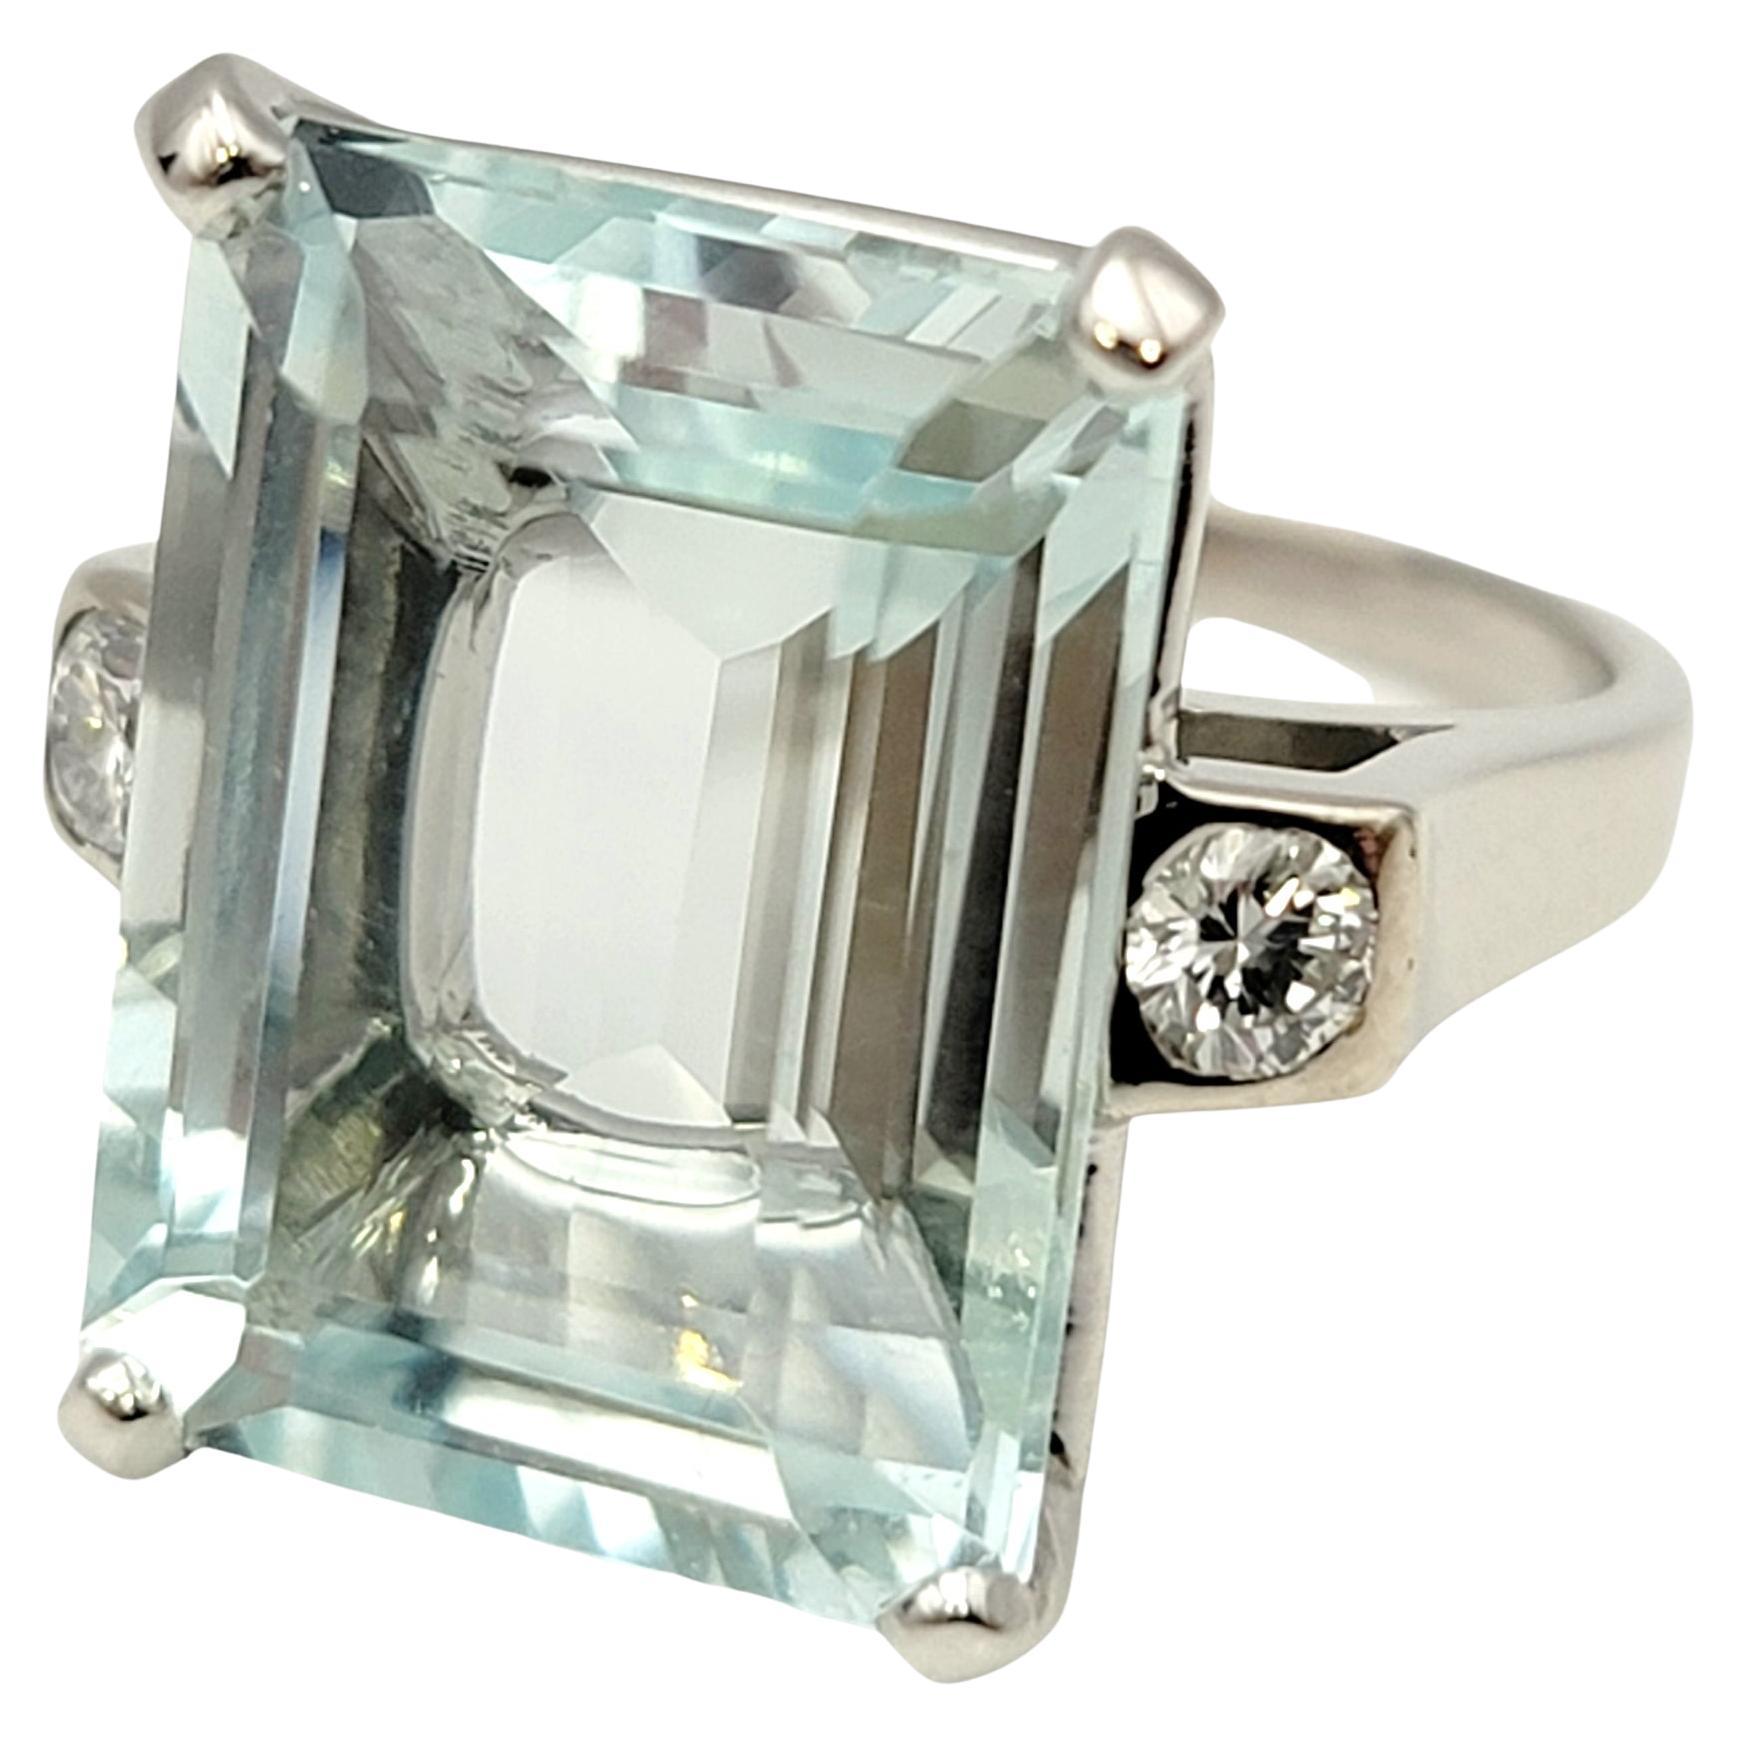 Ring size: 4.75

Stunningly beautiful aquamarine and diamond cocktail ring. This eye-catching piece makes a big statement with its impressive size and exquisite color. The incredible emerald cut aquamarine stone is 4 prong set in polished platinum